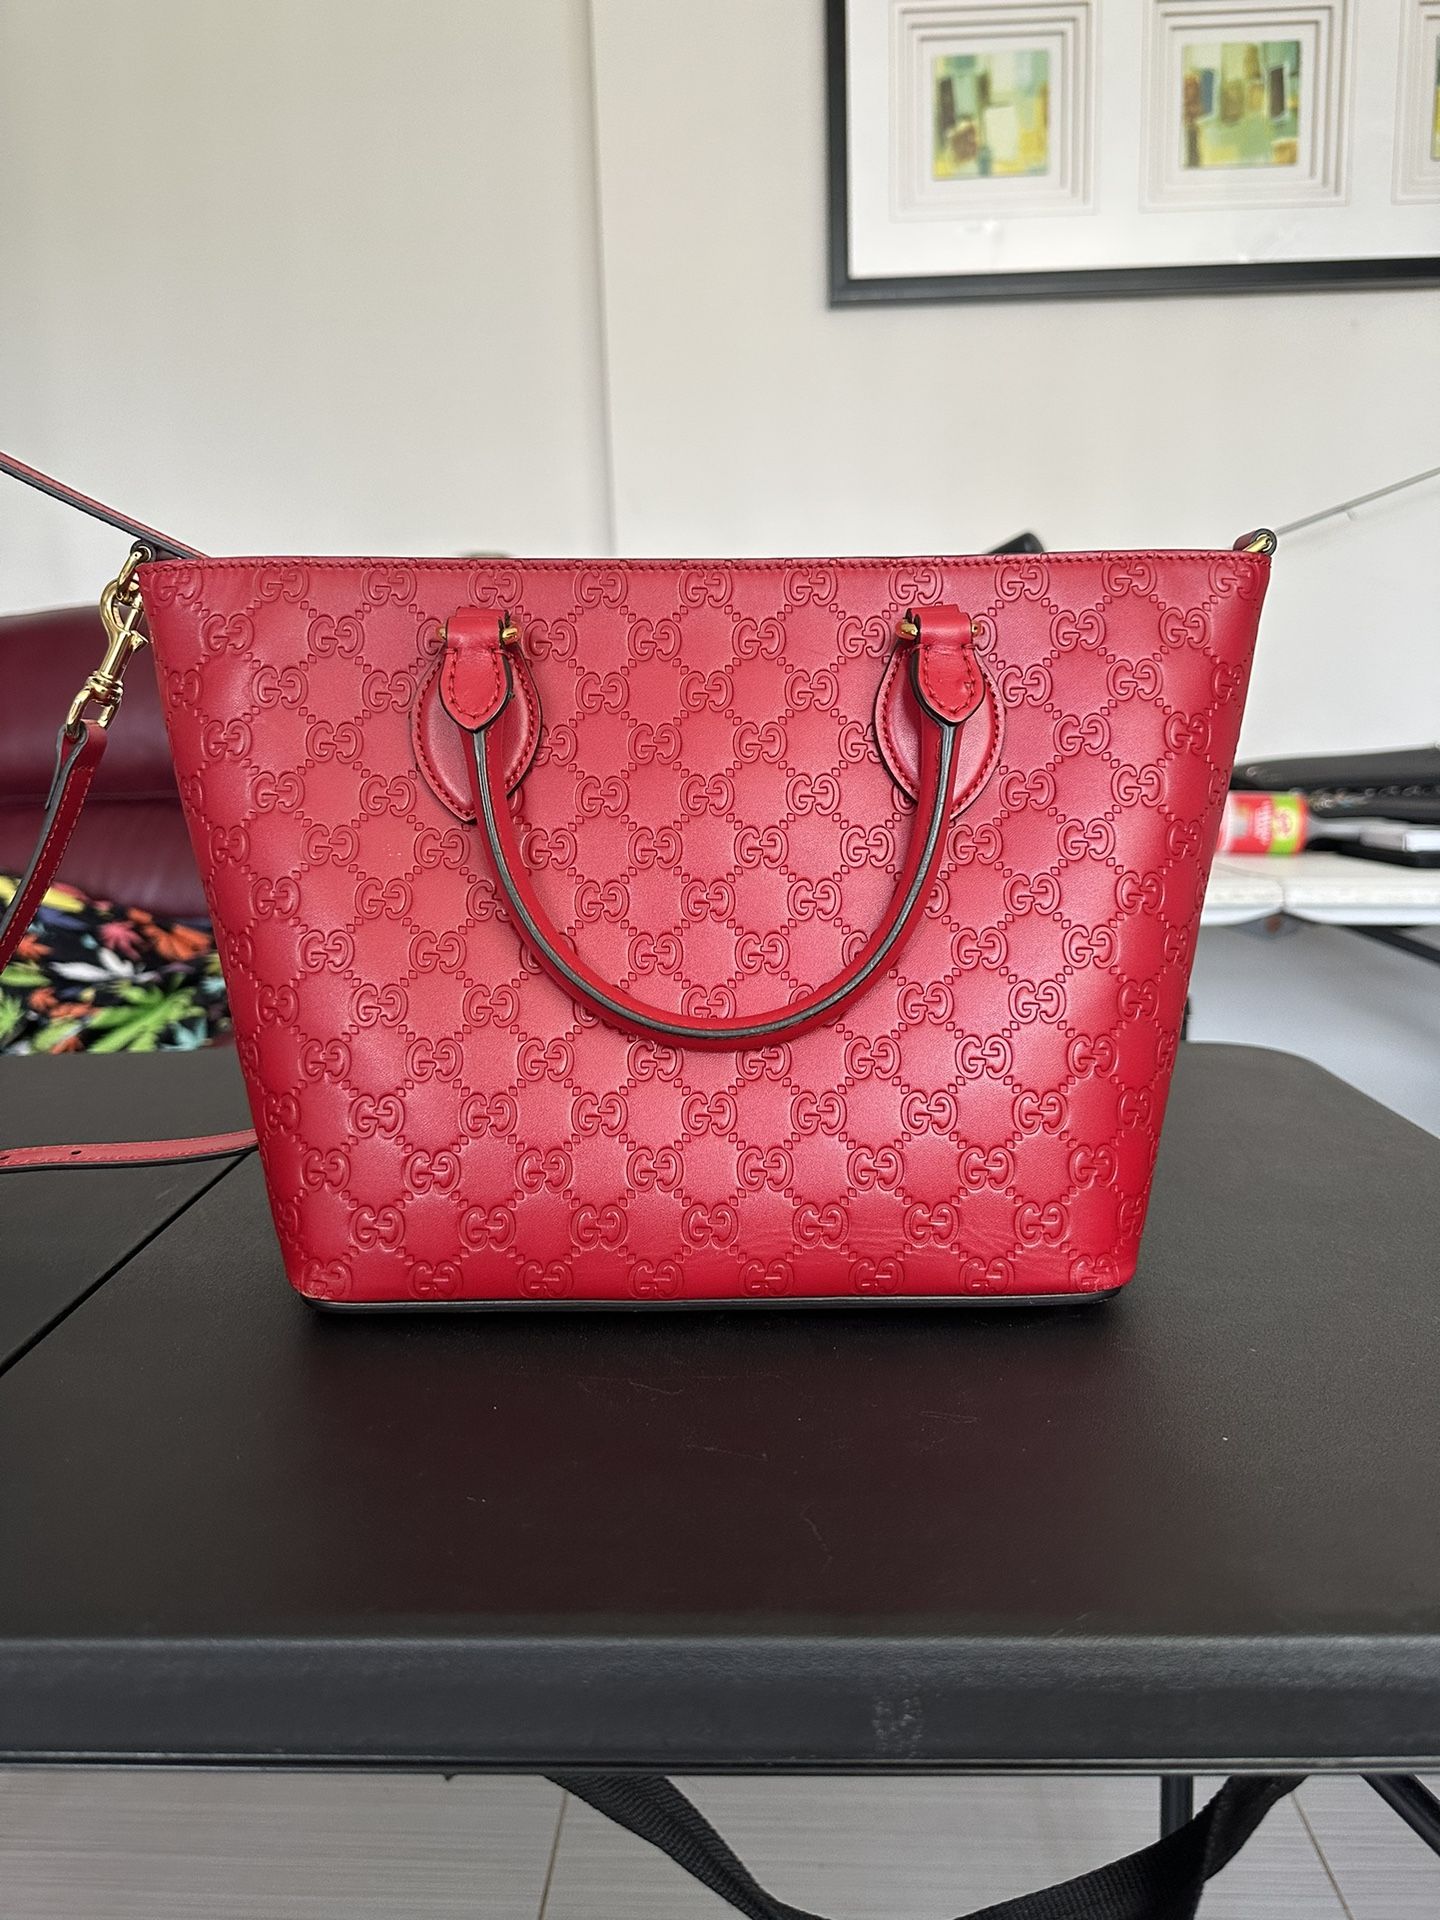 Vintage Red Gucci Purse Authentic for Sale in Ormond Beach, FL - OfferUp